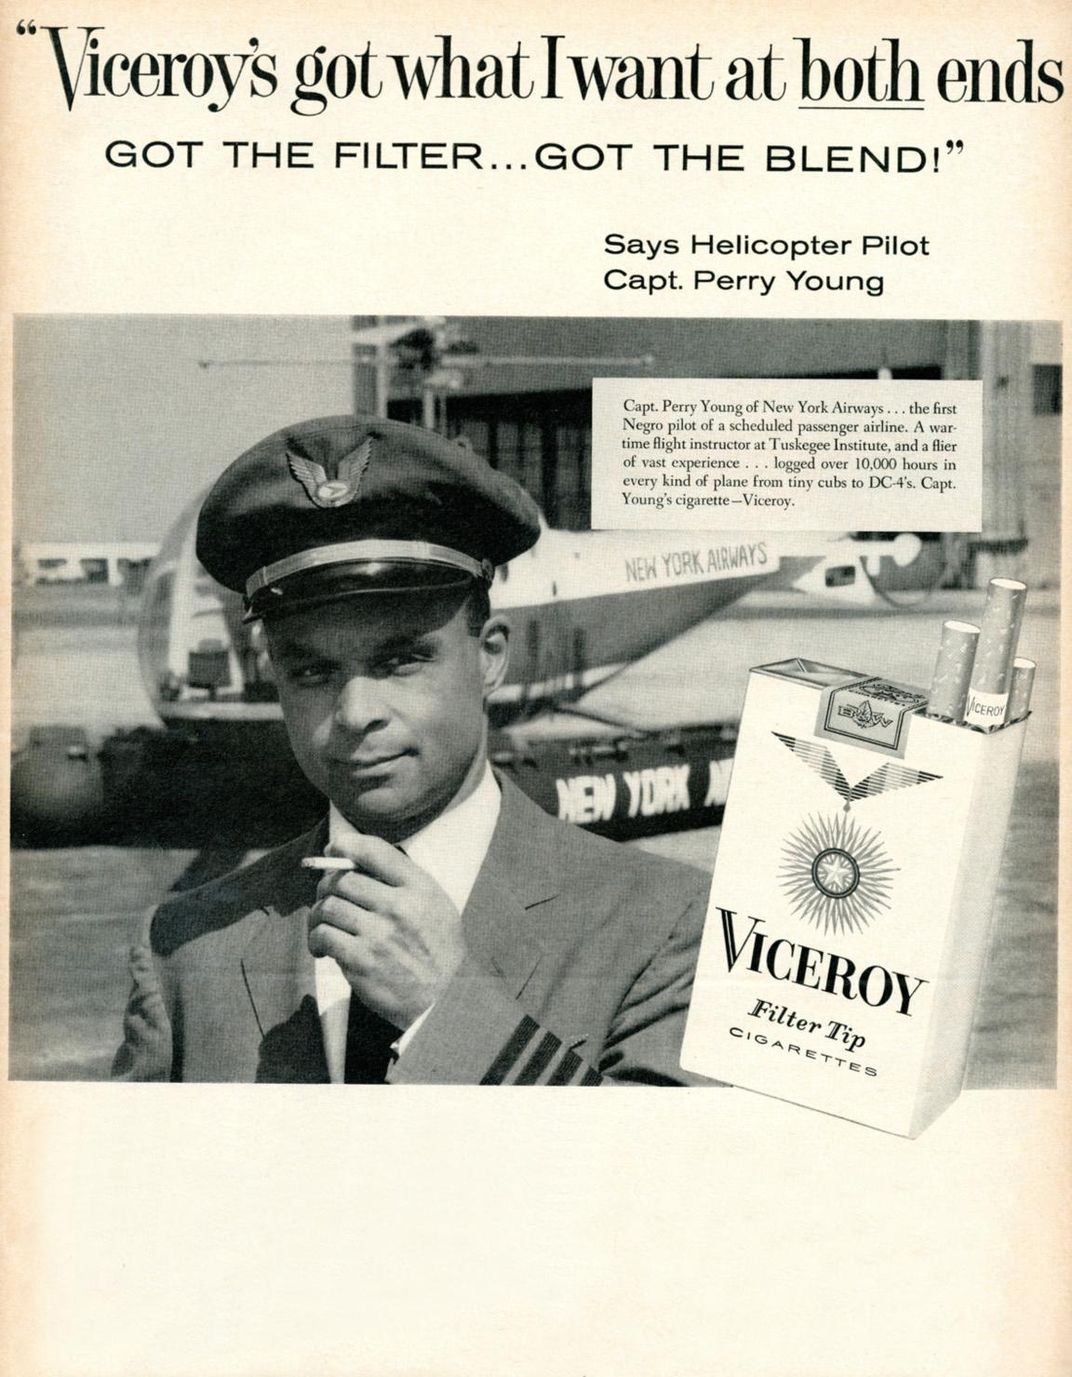 Viceroy ad